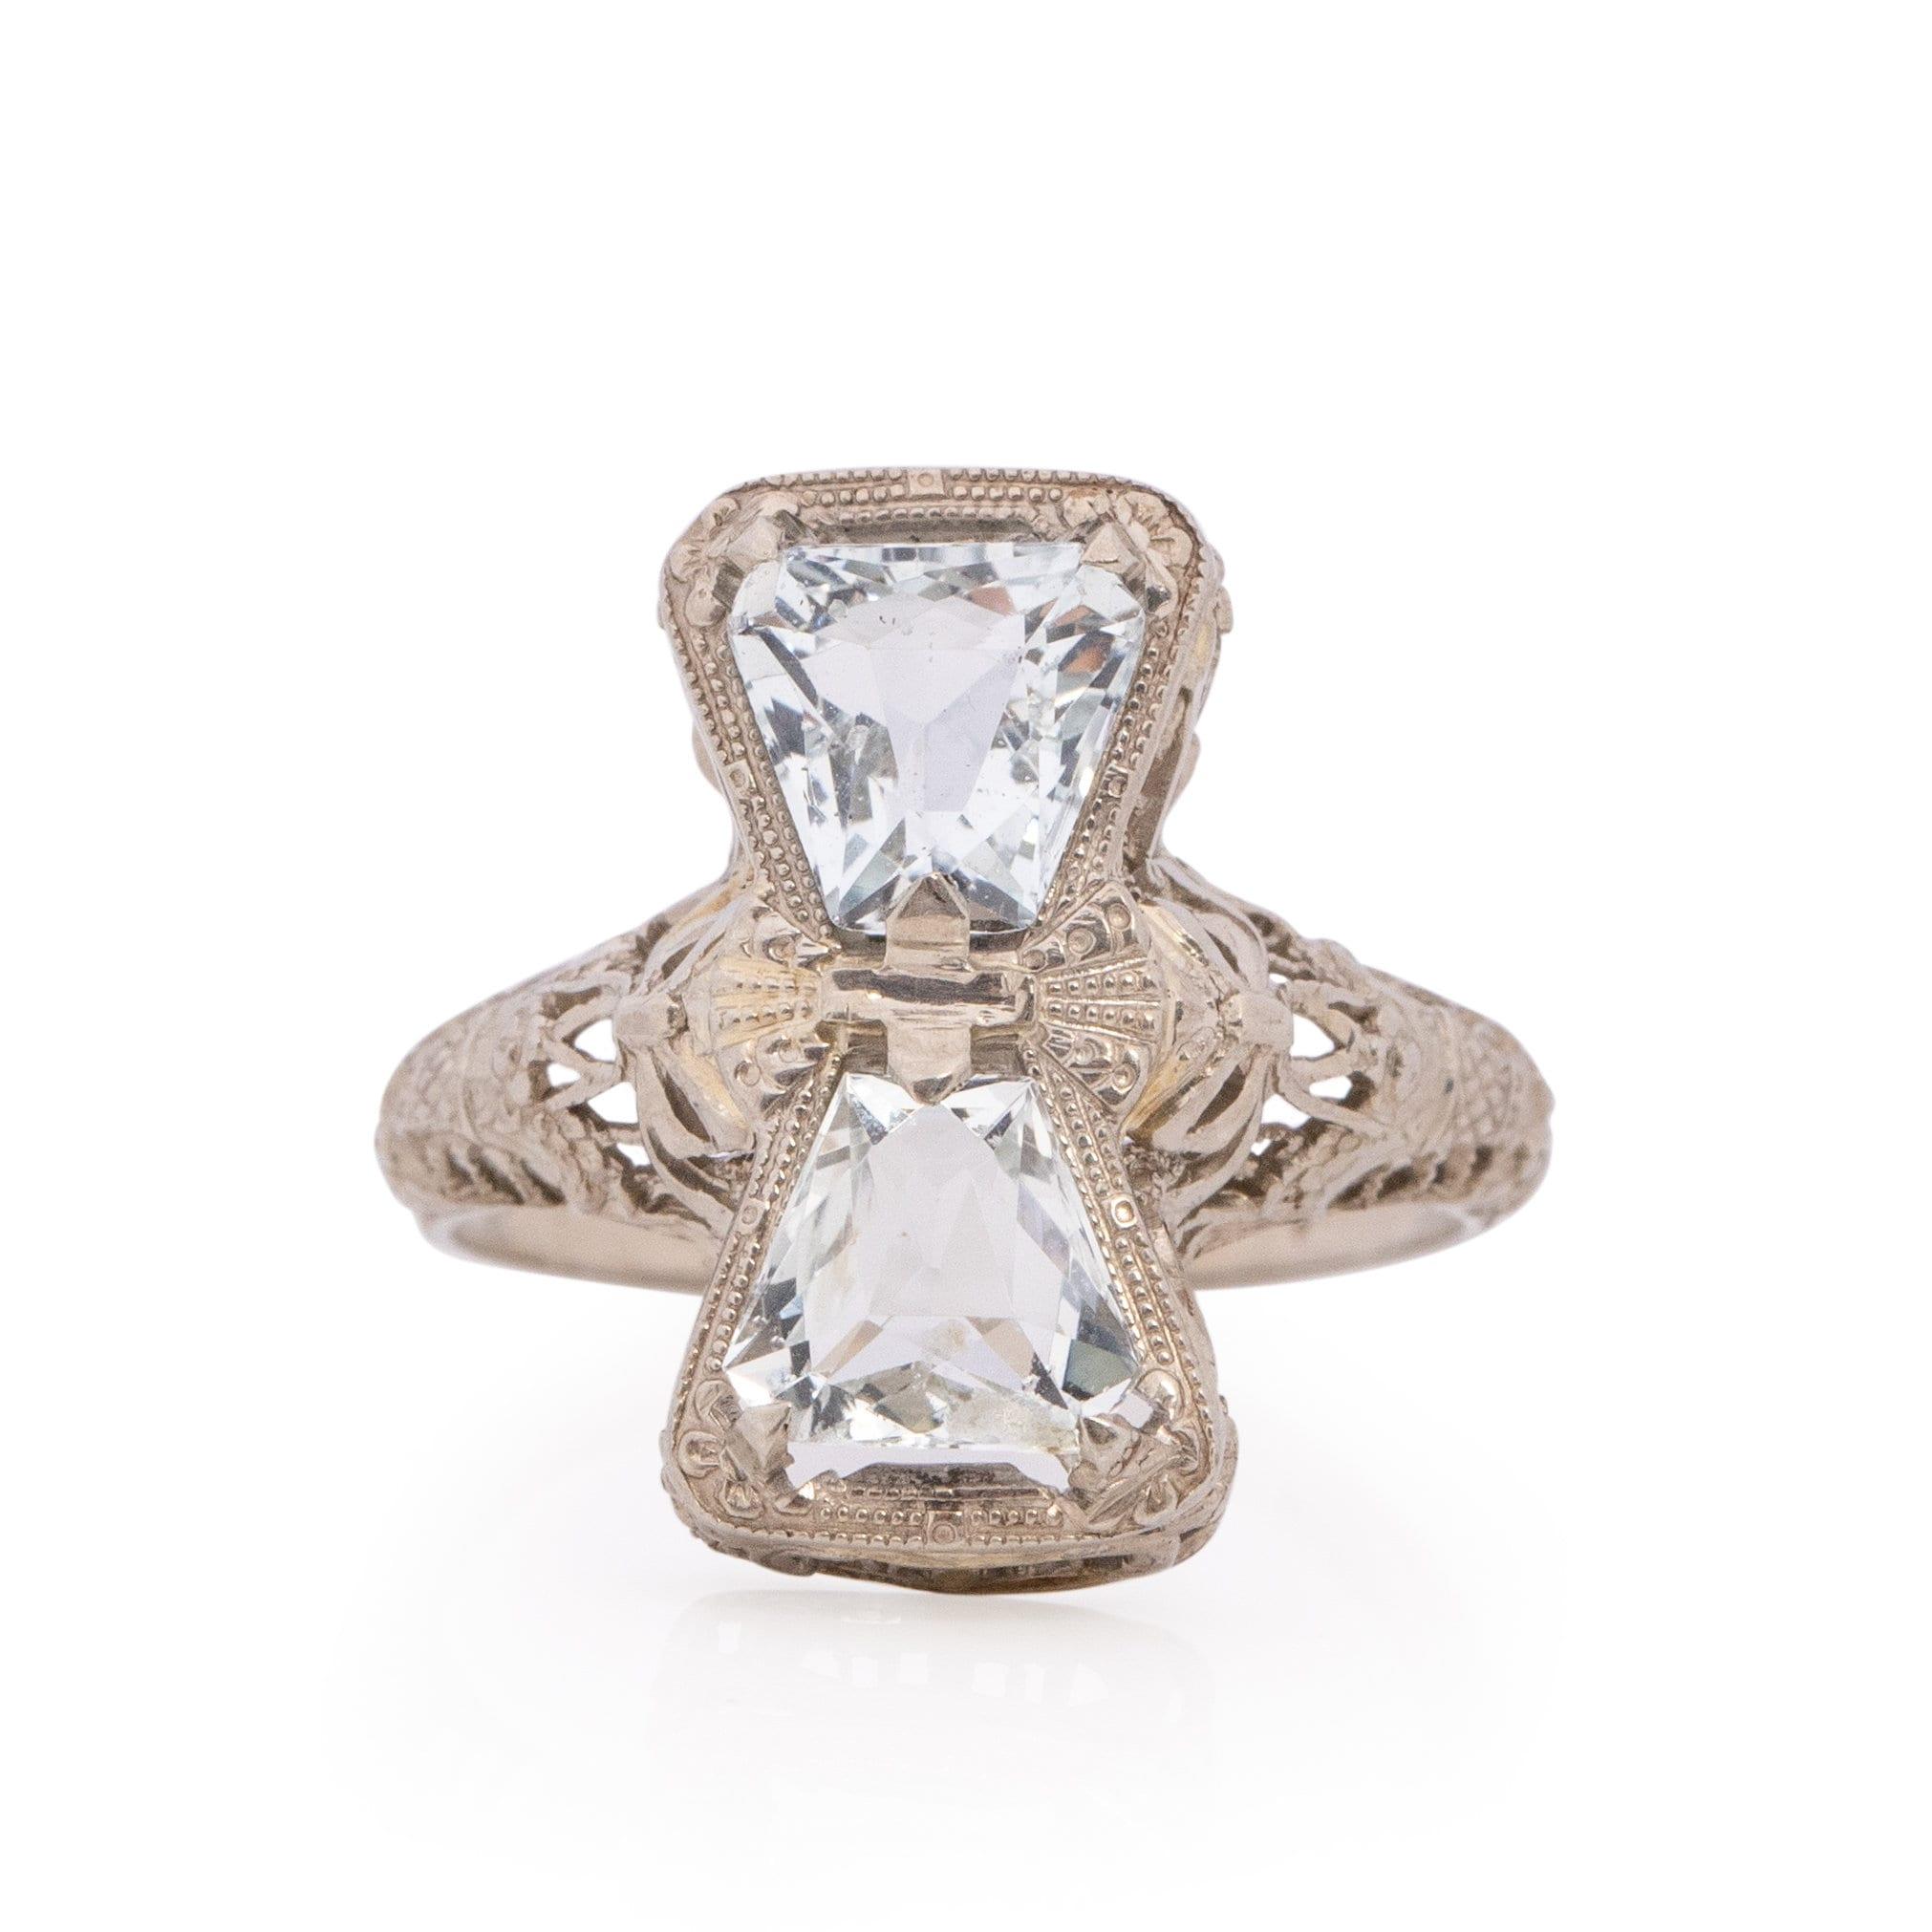 Presenting a genuinely distinctive piece, this Art Deco ring boasts exquisite details and a captivating bow motif. Meticulously crafted from lustrous 14K white gold, a vertical filigree-encased bow elegantly graces the finger, introducing a splash